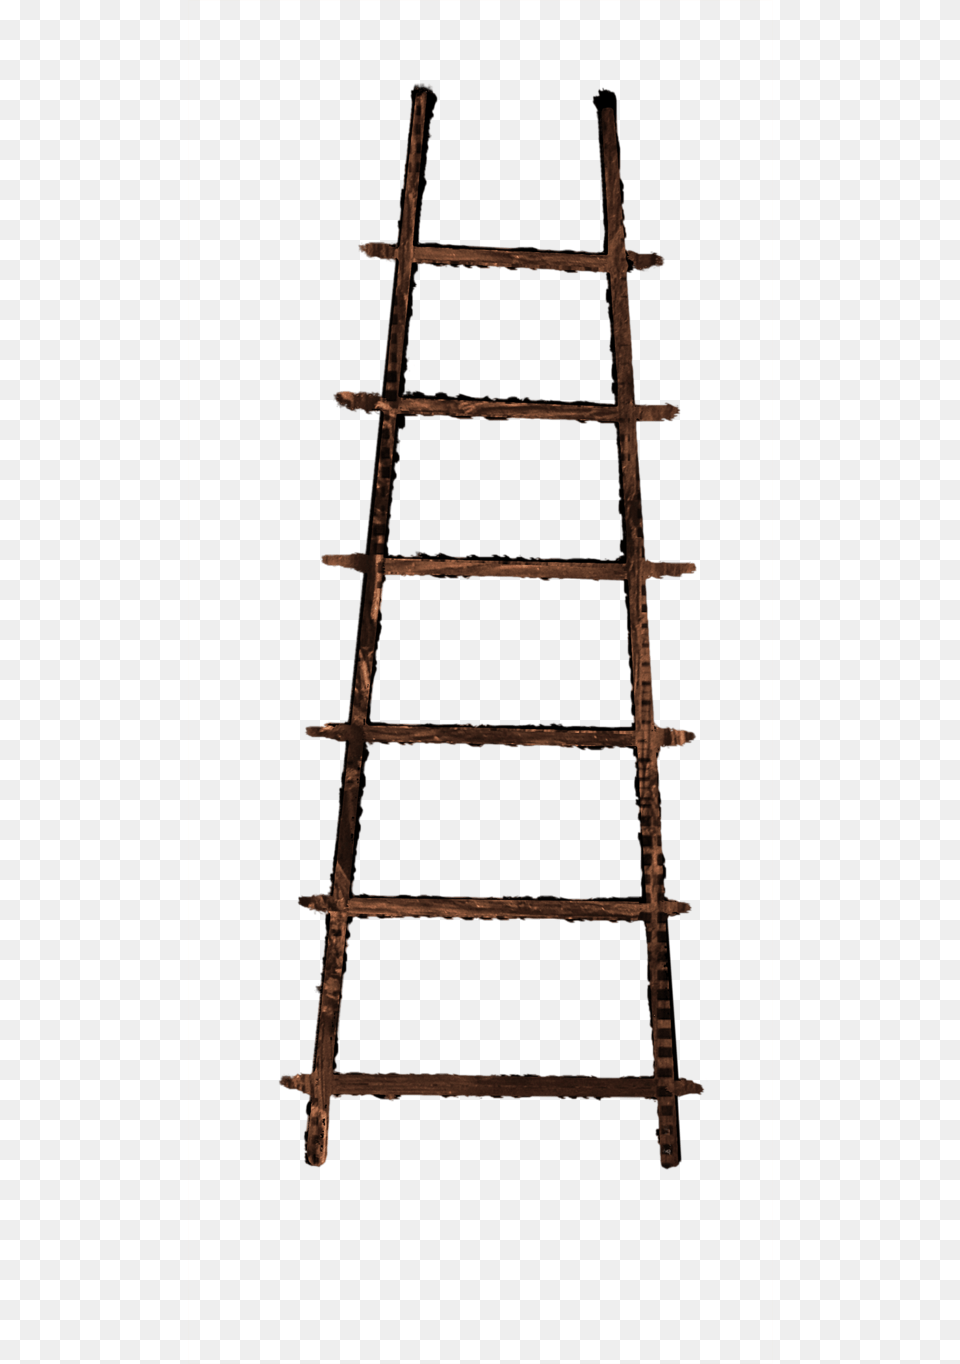 Old Ladder Rough Wood Grain Cutout, Construction, Scaffolding Png